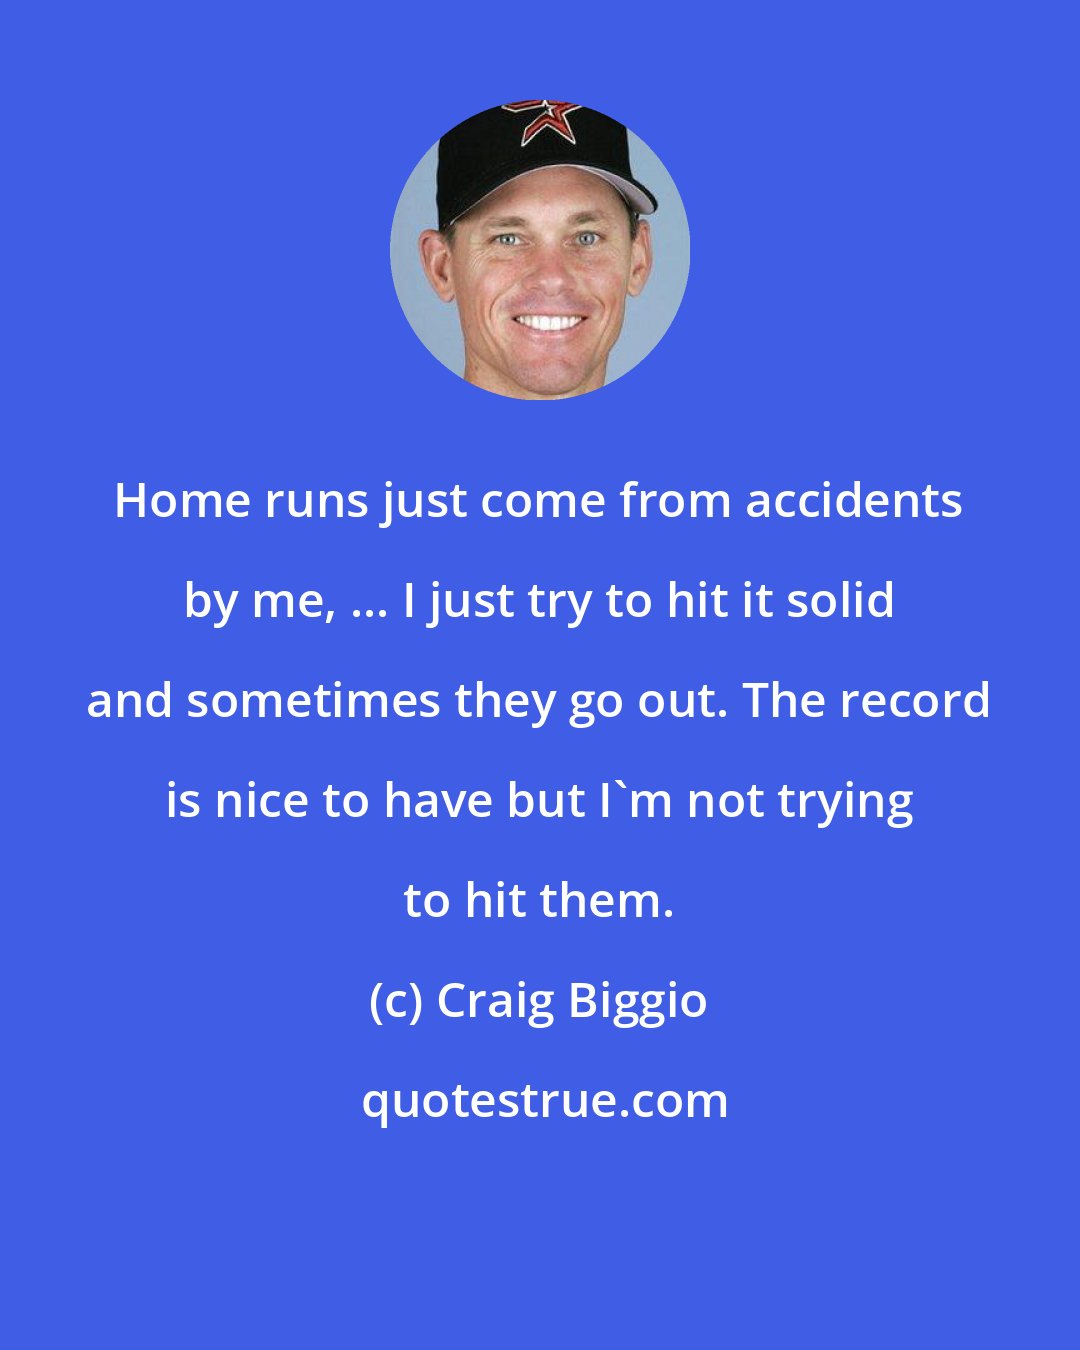 Craig Biggio: Home runs just come from accidents by me, ... I just try to hit it solid and sometimes they go out. The record is nice to have but I'm not trying to hit them.